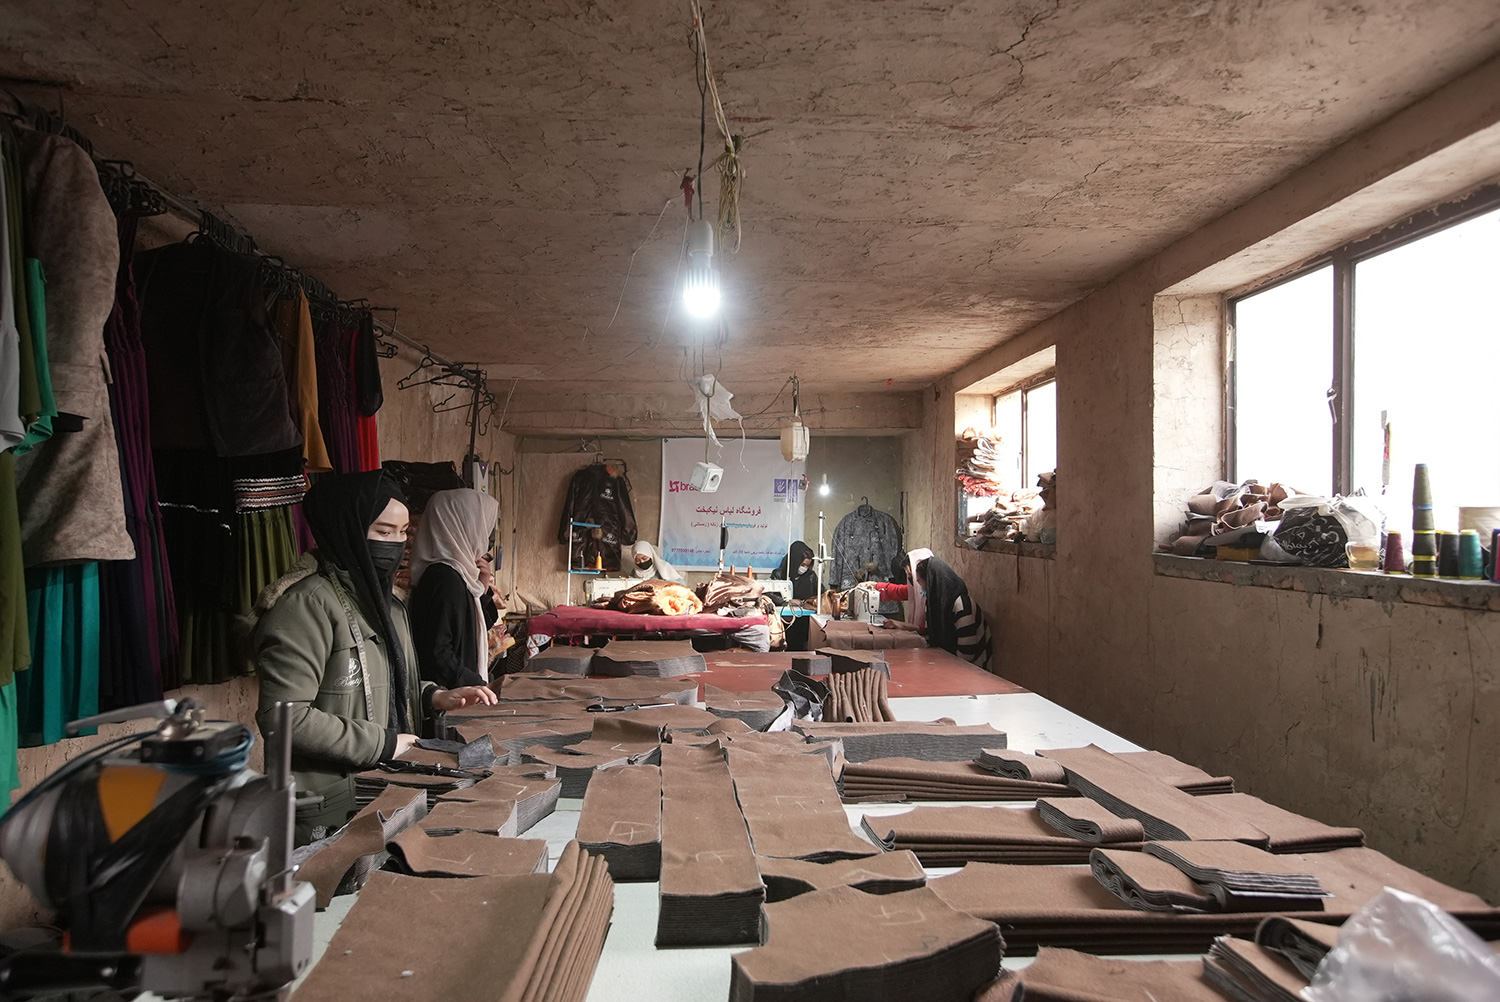 Tailoring apprentices in Afghanistan cut and sort material to make coats.